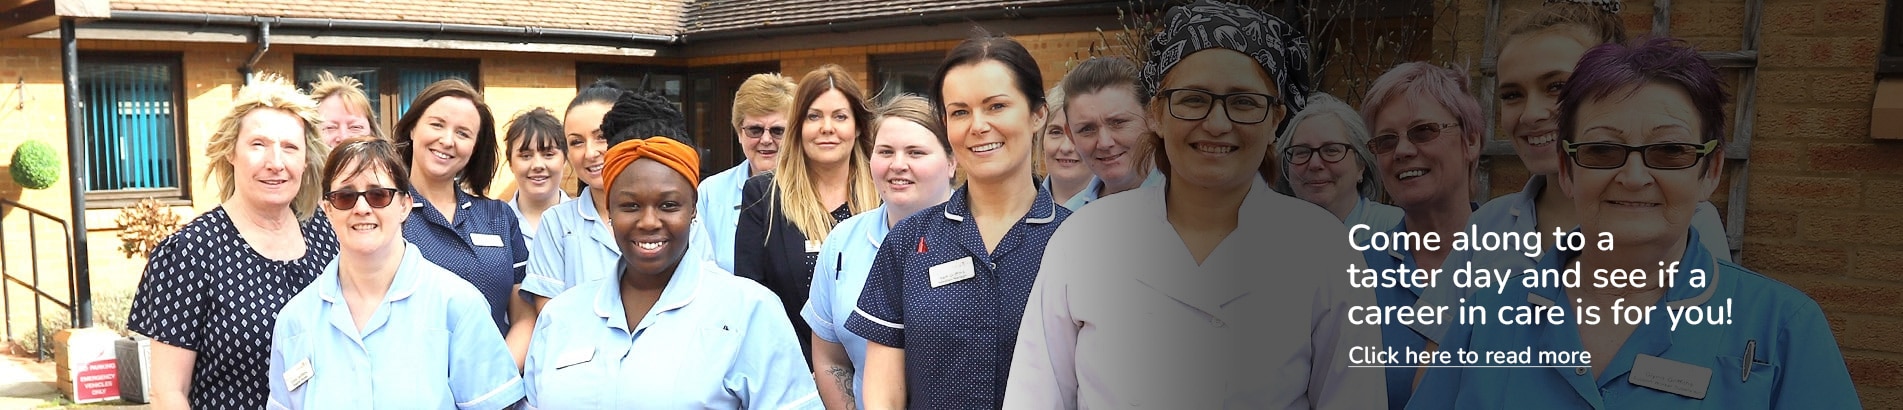 Latest Jobs at New Fairholme provided by Coverage Care